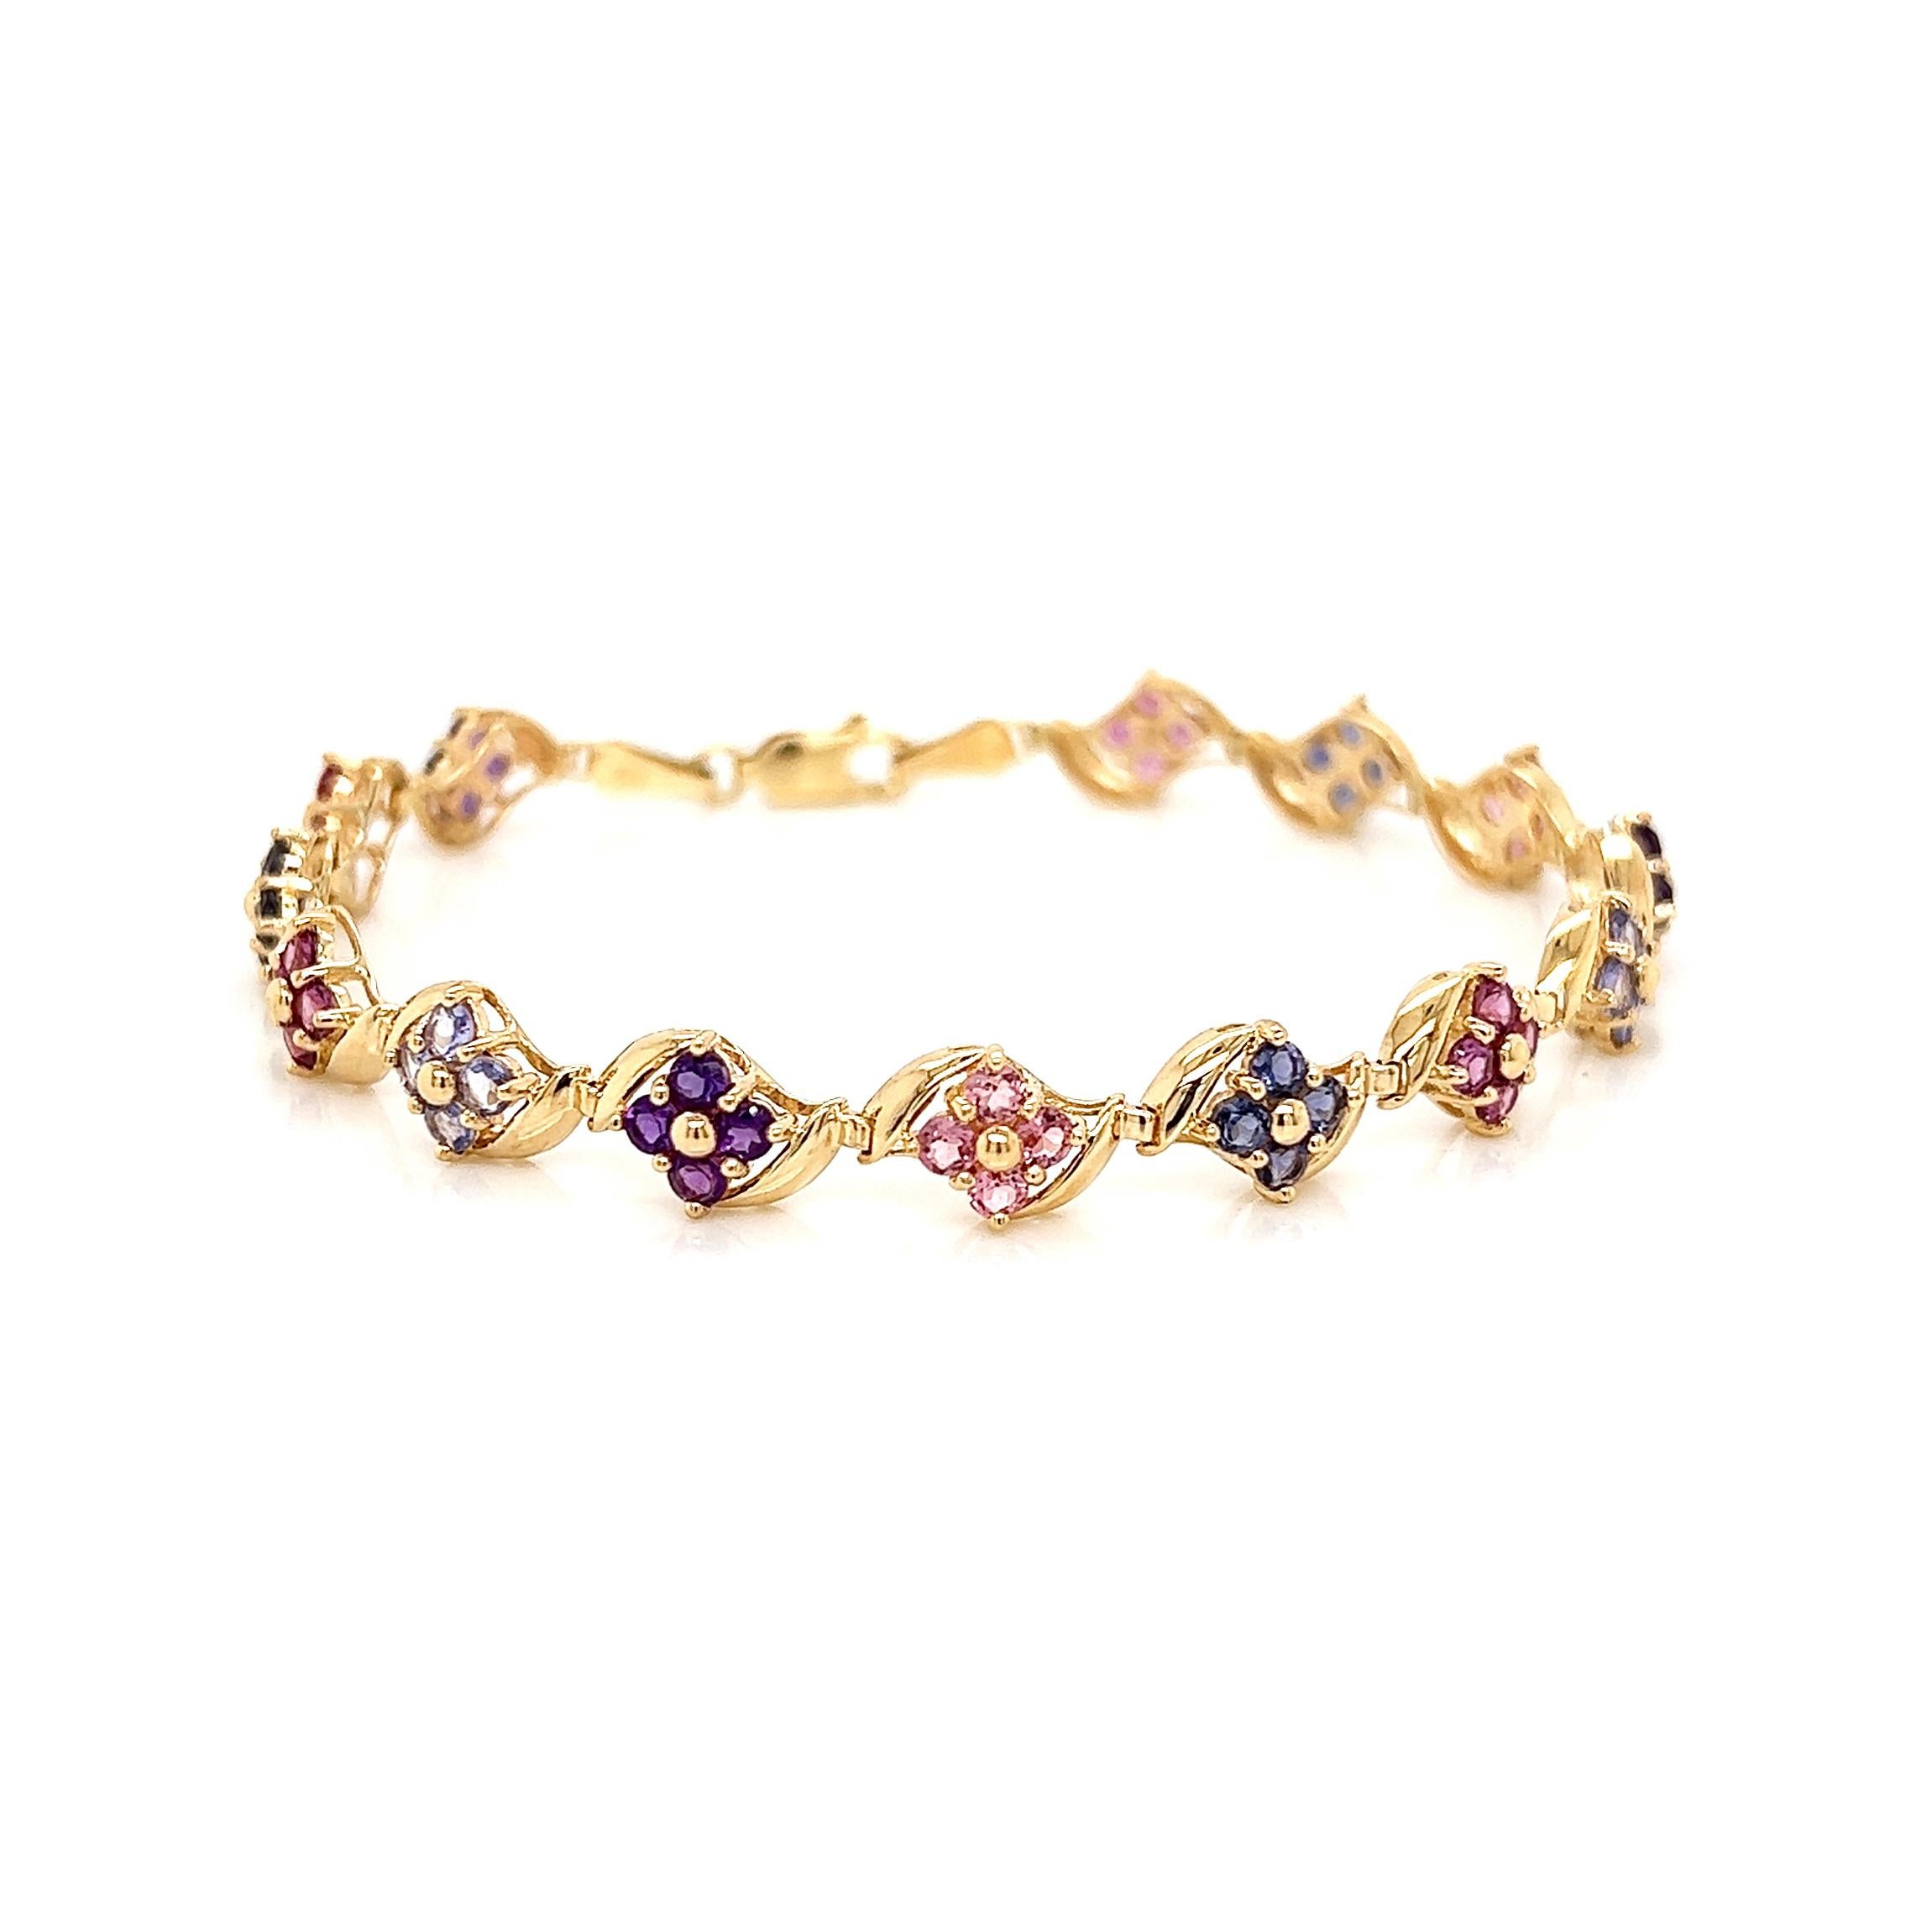 6.0 Carat Amethyst and Pink Sapphire Vintage Style Bracelet

-Metal Type: 14K Yellow Gold,
-Gemstone: Amethyst, Pink Sapphire
-Size: 7.0 inches

Handmade in New York City.